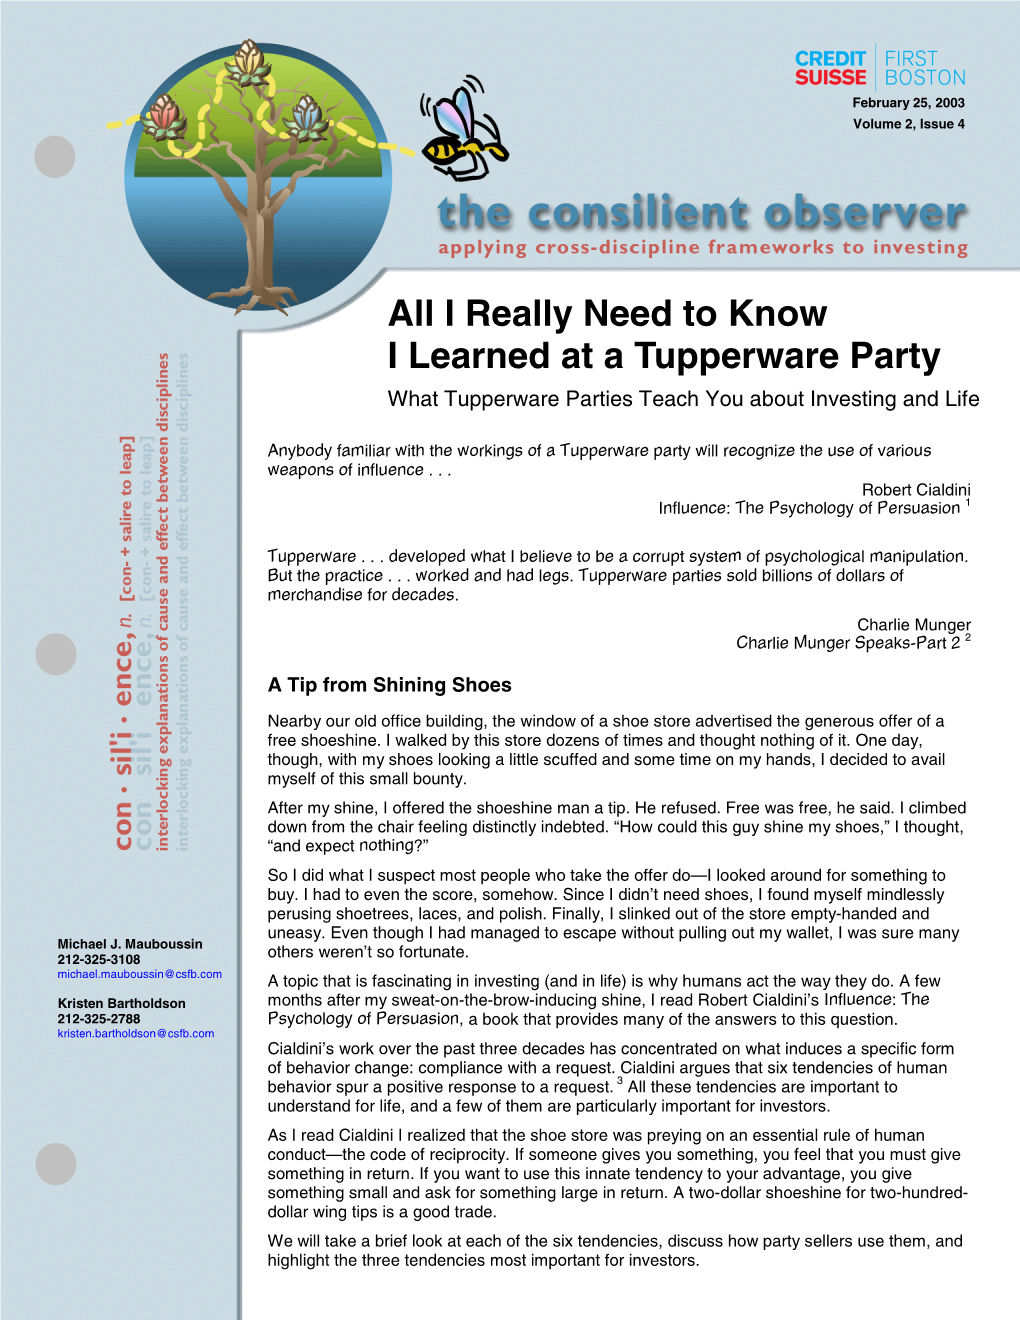 All I Really Need to Know I Learned at a Tupperware Party What Tupperware Parties Teach You About Investing and Life